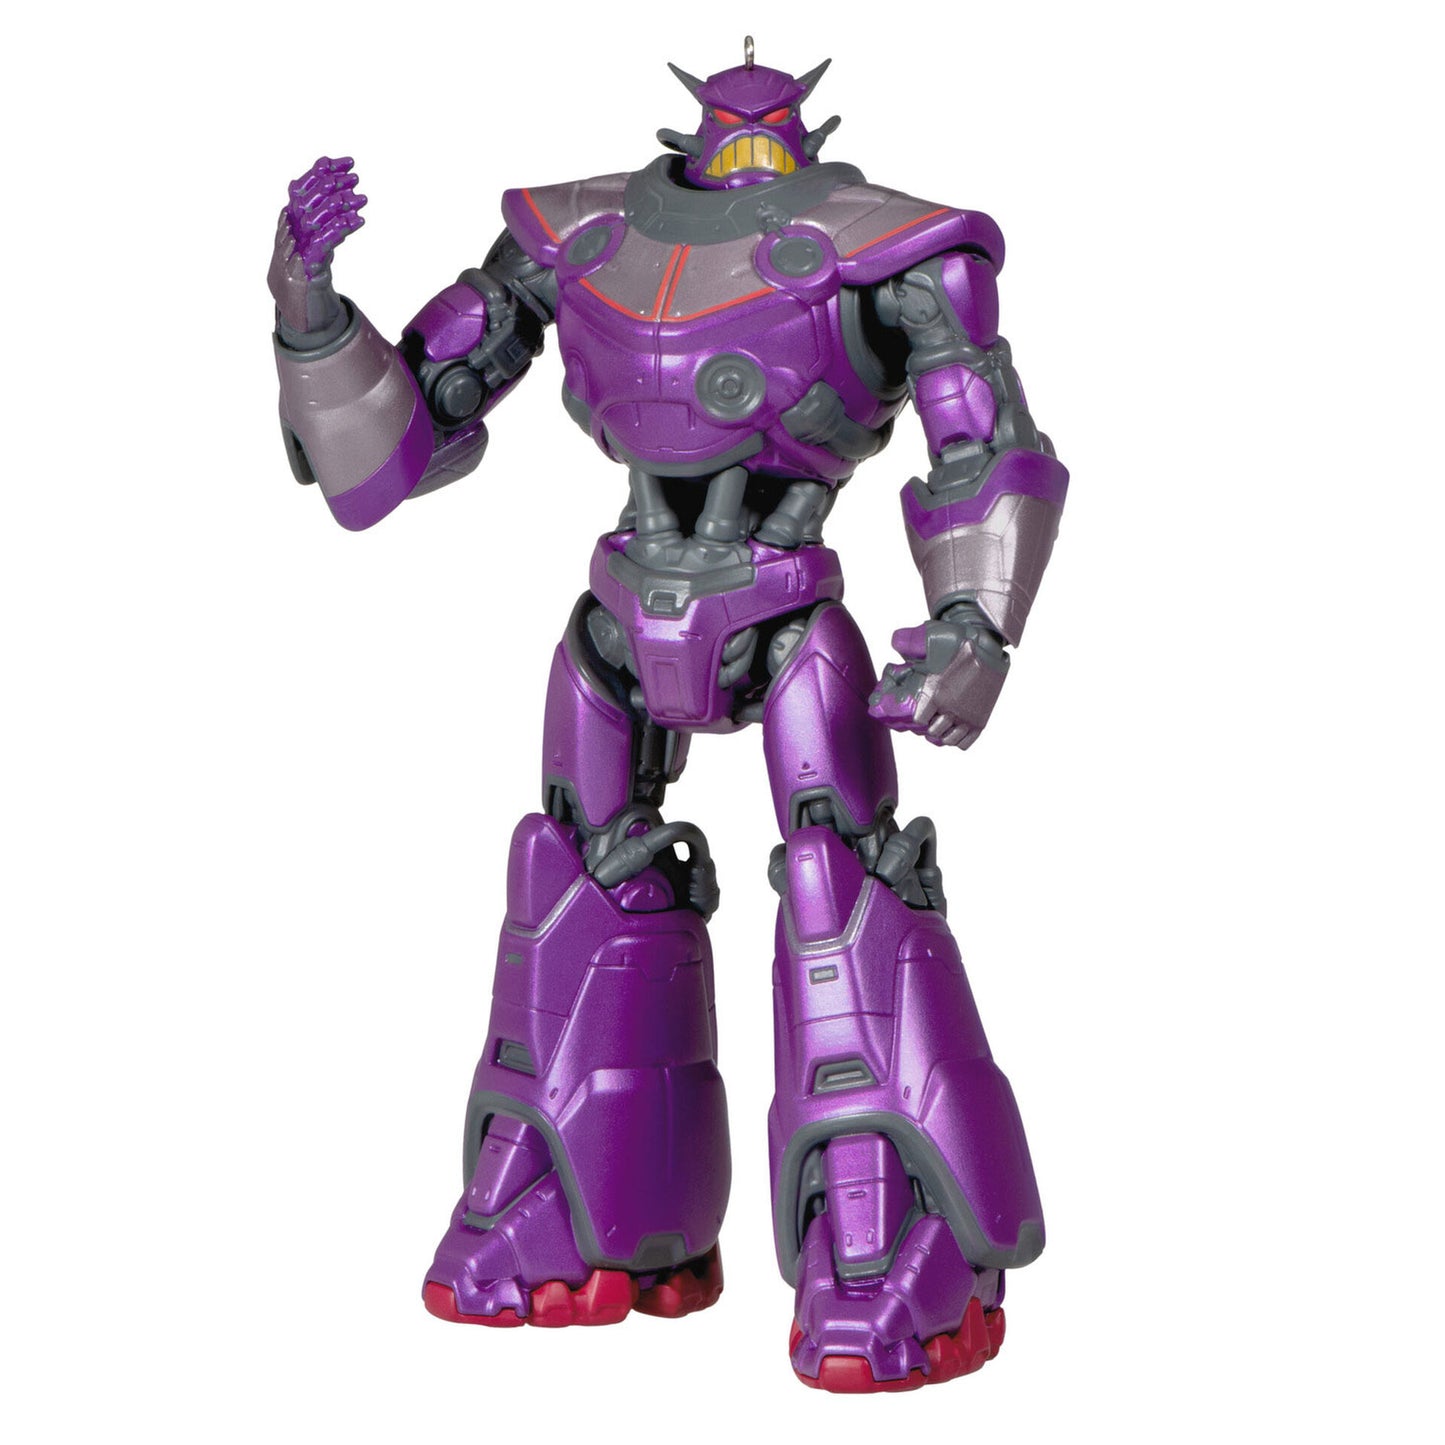 Christmas ornament that is an action figure of the villain Emperor Zurg from the Disney Toy Story franchise.